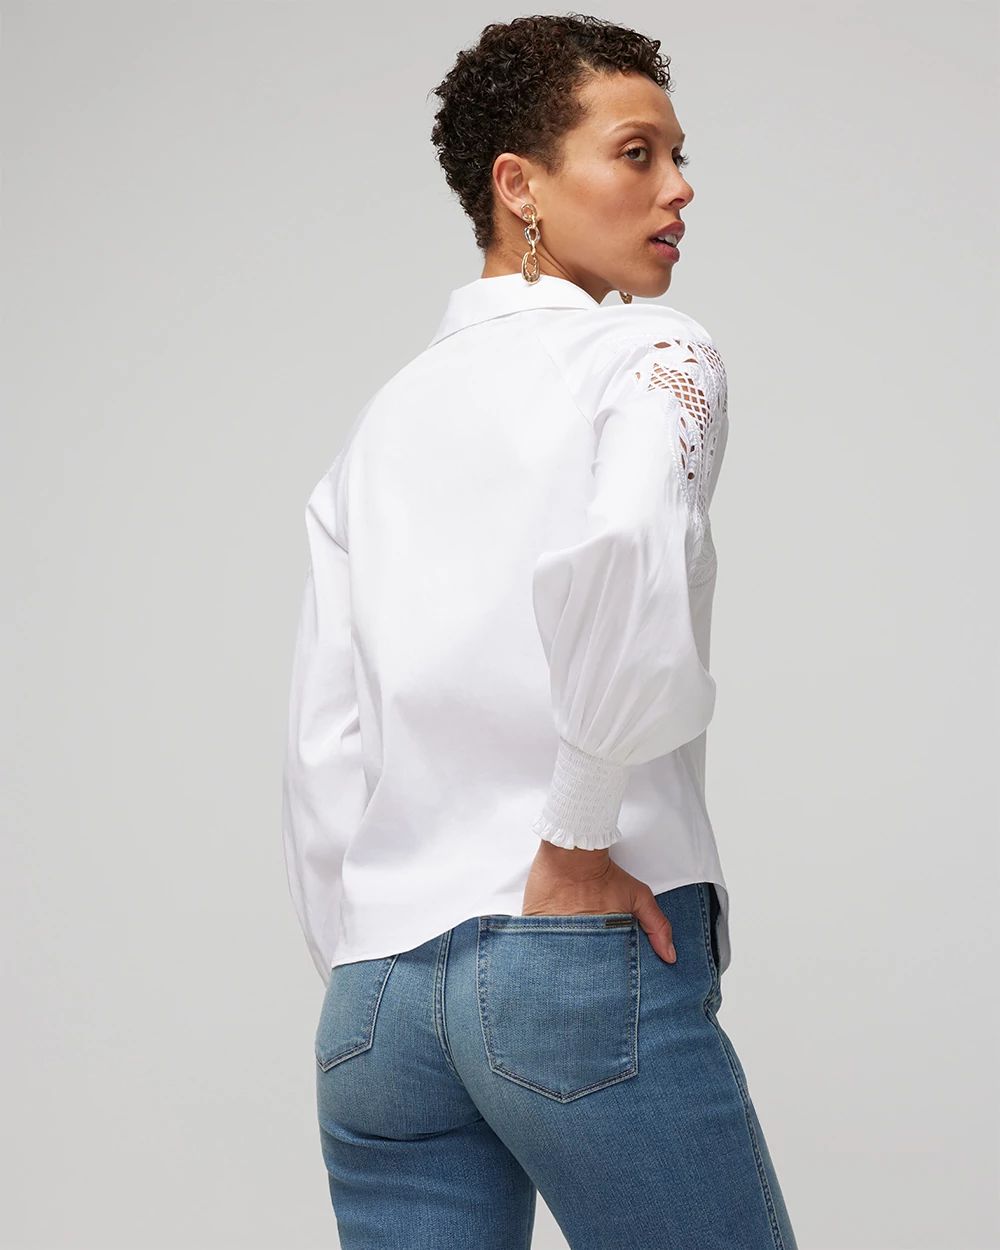 Embroidered Poplin Shirt click to view larger image.